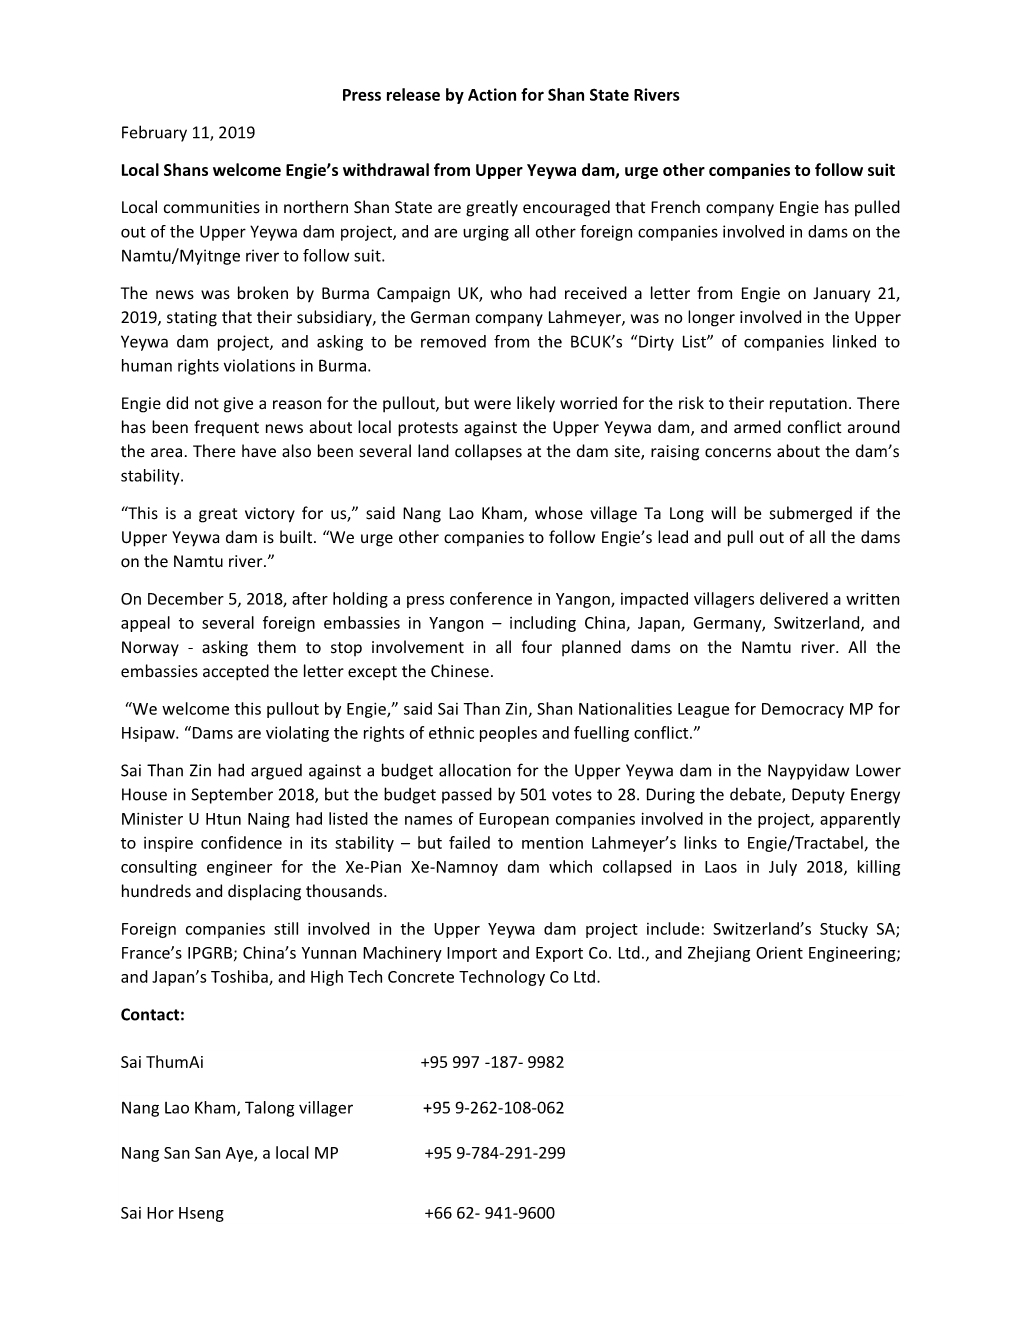 Press Release by Action for Shan State Rivers February 11, 2019 Local